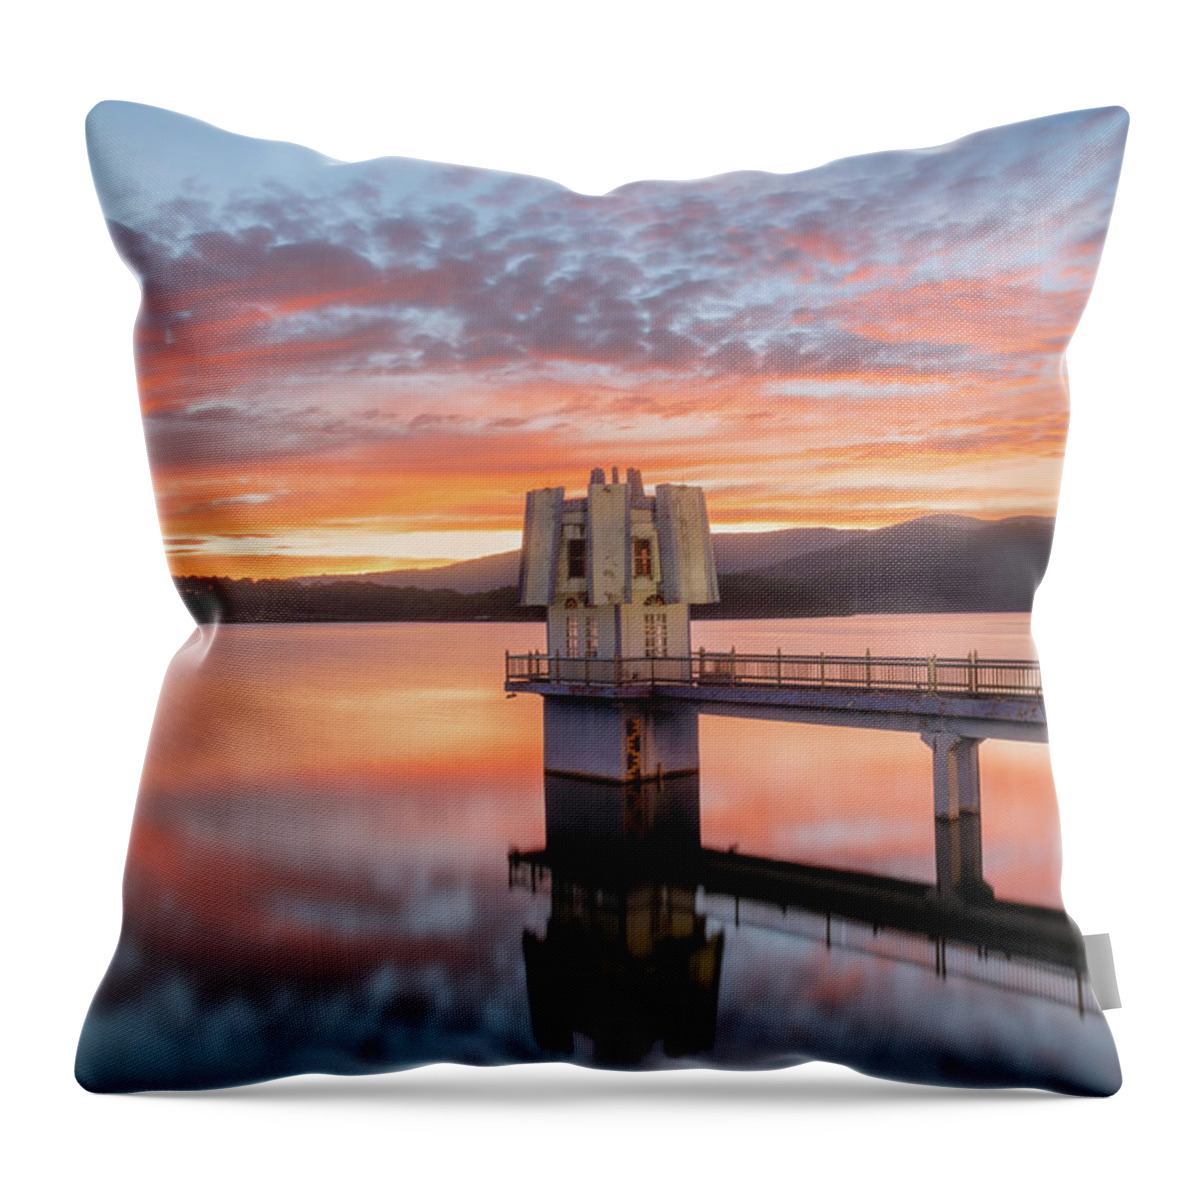 Awesome Throw Pillow featuring the photograph Twilight On The Lake by Khanh Bui Phu